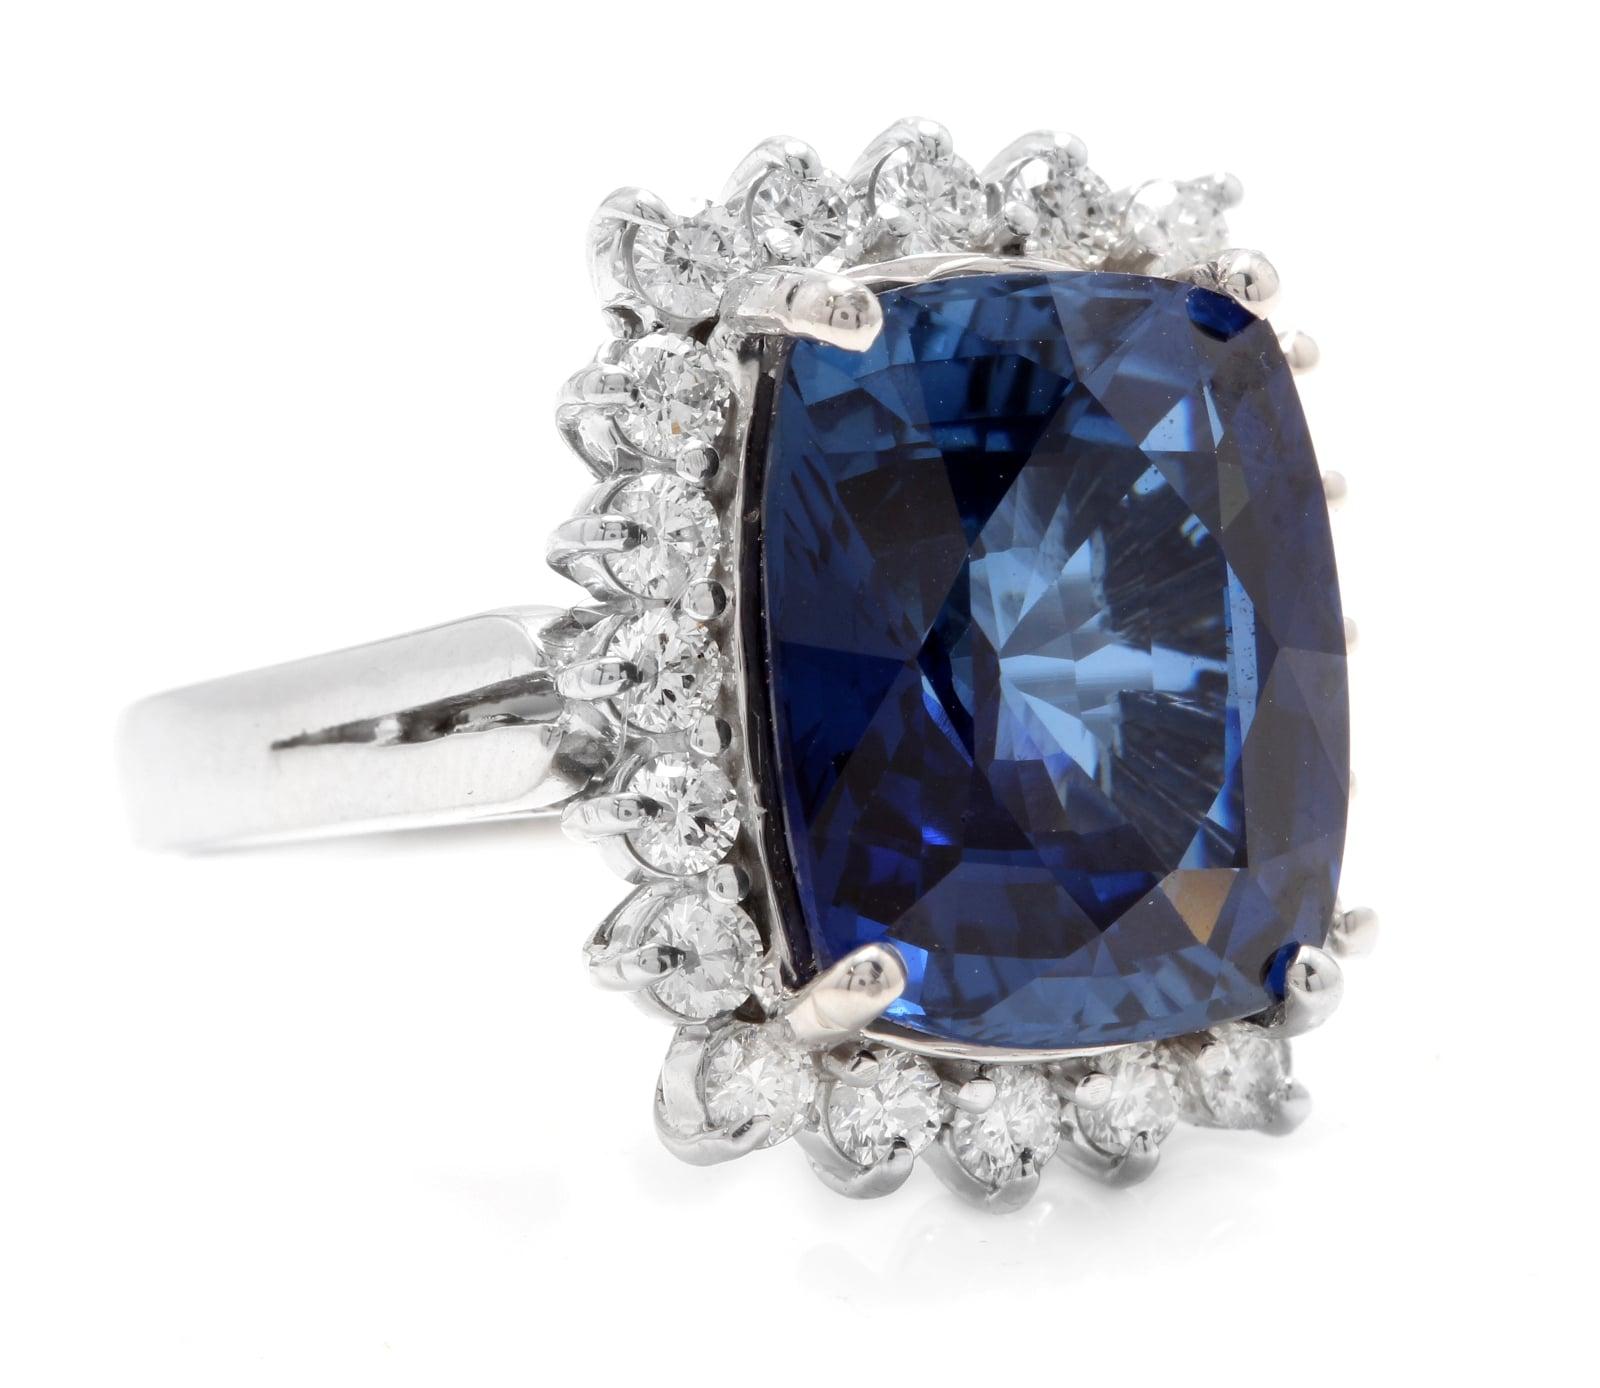 12.75 Carats Ceylon Blue Sapphire and Natural Diamond 14K Solid White Gold Ring

Suggested Replacement Value $5,500.00

Total Blue Sapphire Weight is: 12.00 Carats (Lab Created)

Sapphire Measures: 14 x 12mm

Natural Round Diamonds Weight: 0.75